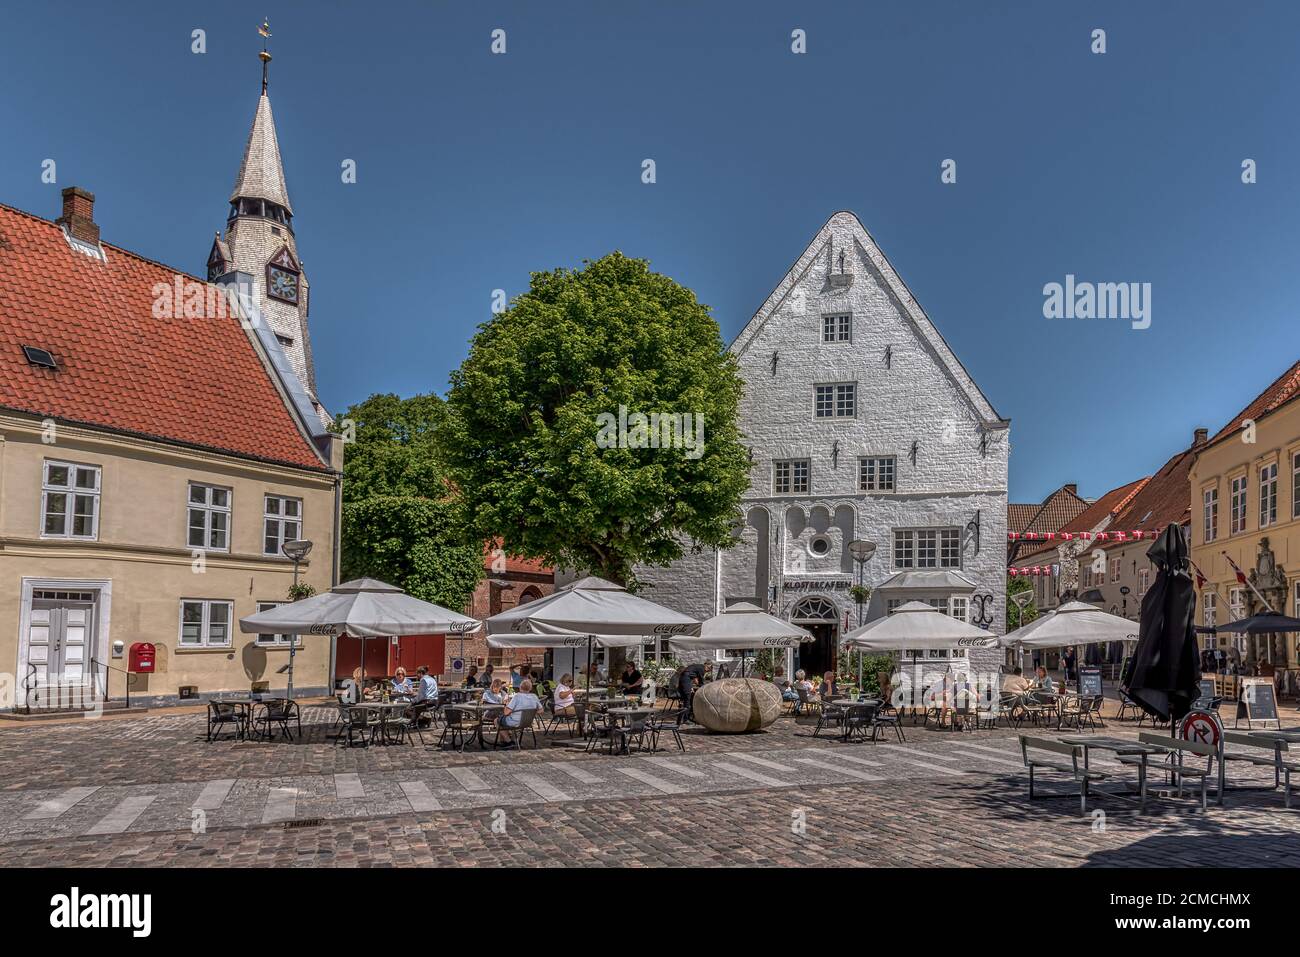 The marketplace in Tonder with Restaurants and parasols in the sunshine, Denmark, June 1, 2020 Stock Photo